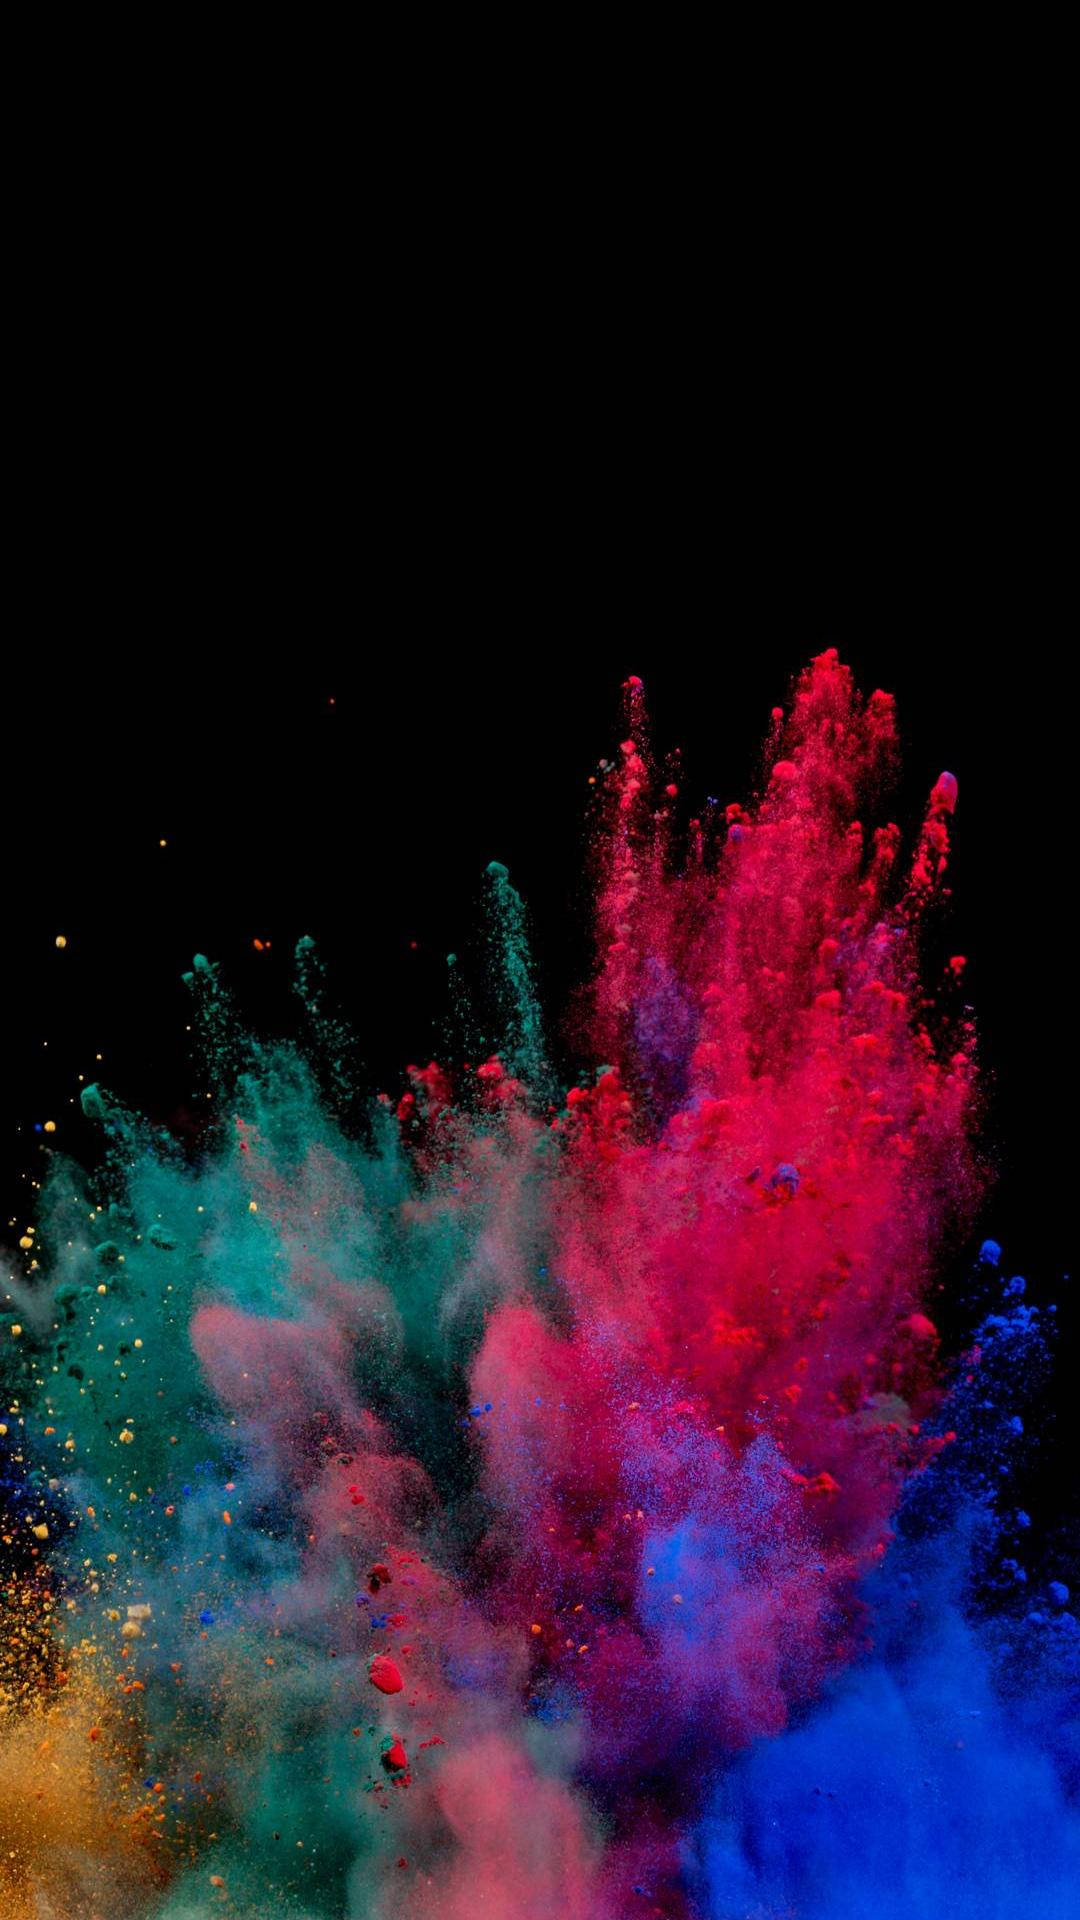 Discover the Magic of Amoled Color Wallpaper